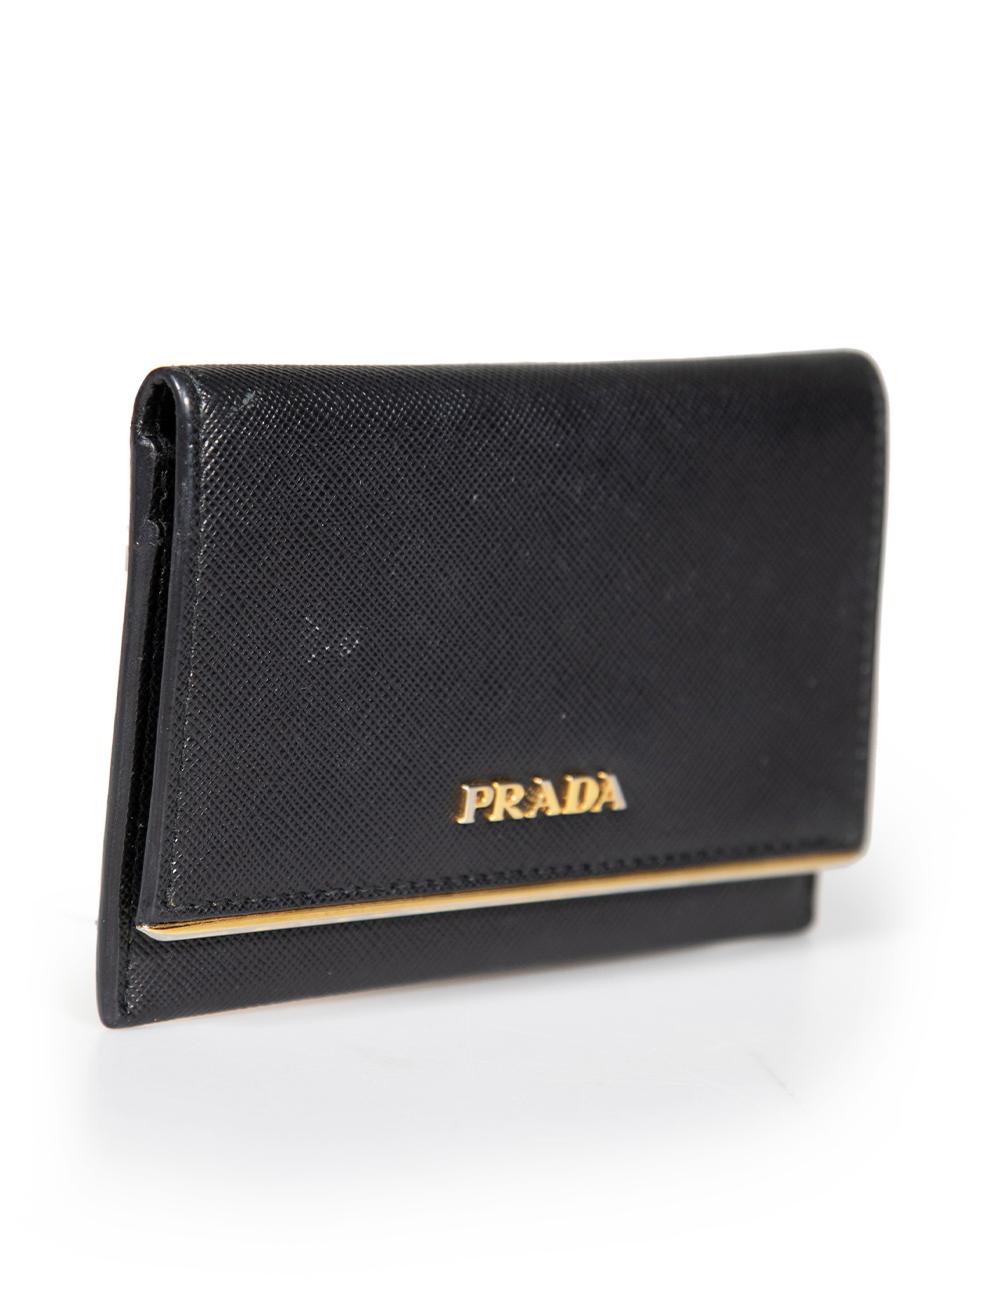 CONDITION is Very good. Minimal wear to wallet is evident. Minimal wear to the front with a small abrasion and the logo lettering has started to tarnish on this used Prada designer resale item.
 
 
 
 Details
 
 
 Black
 
 Saffiano leather
 
 Card